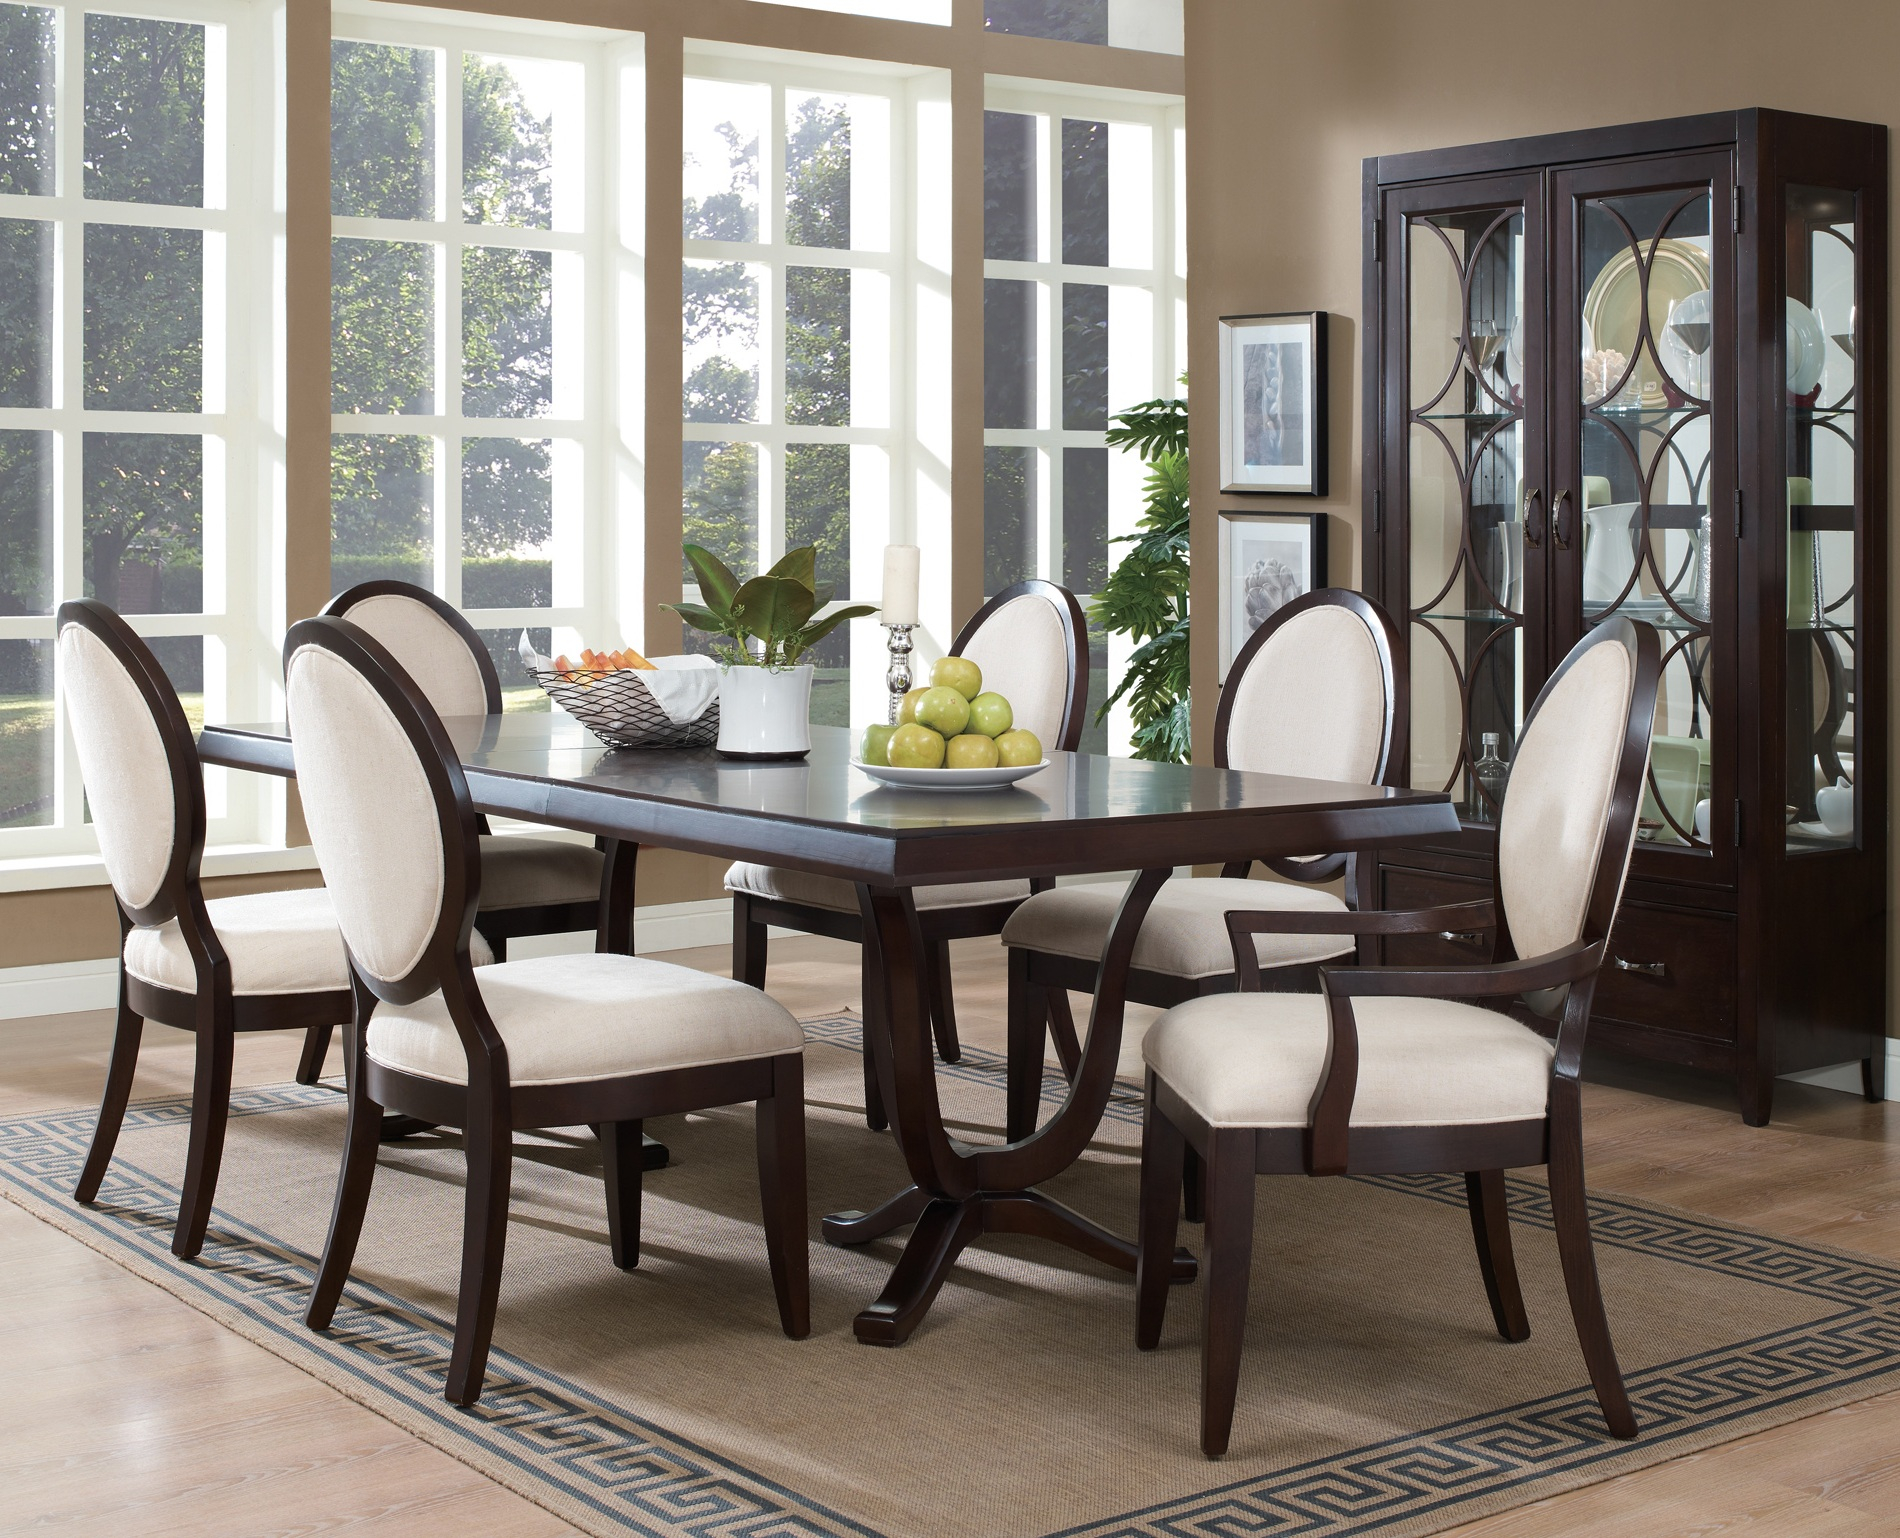 Dining Room Suite Manufacturers In South Africa